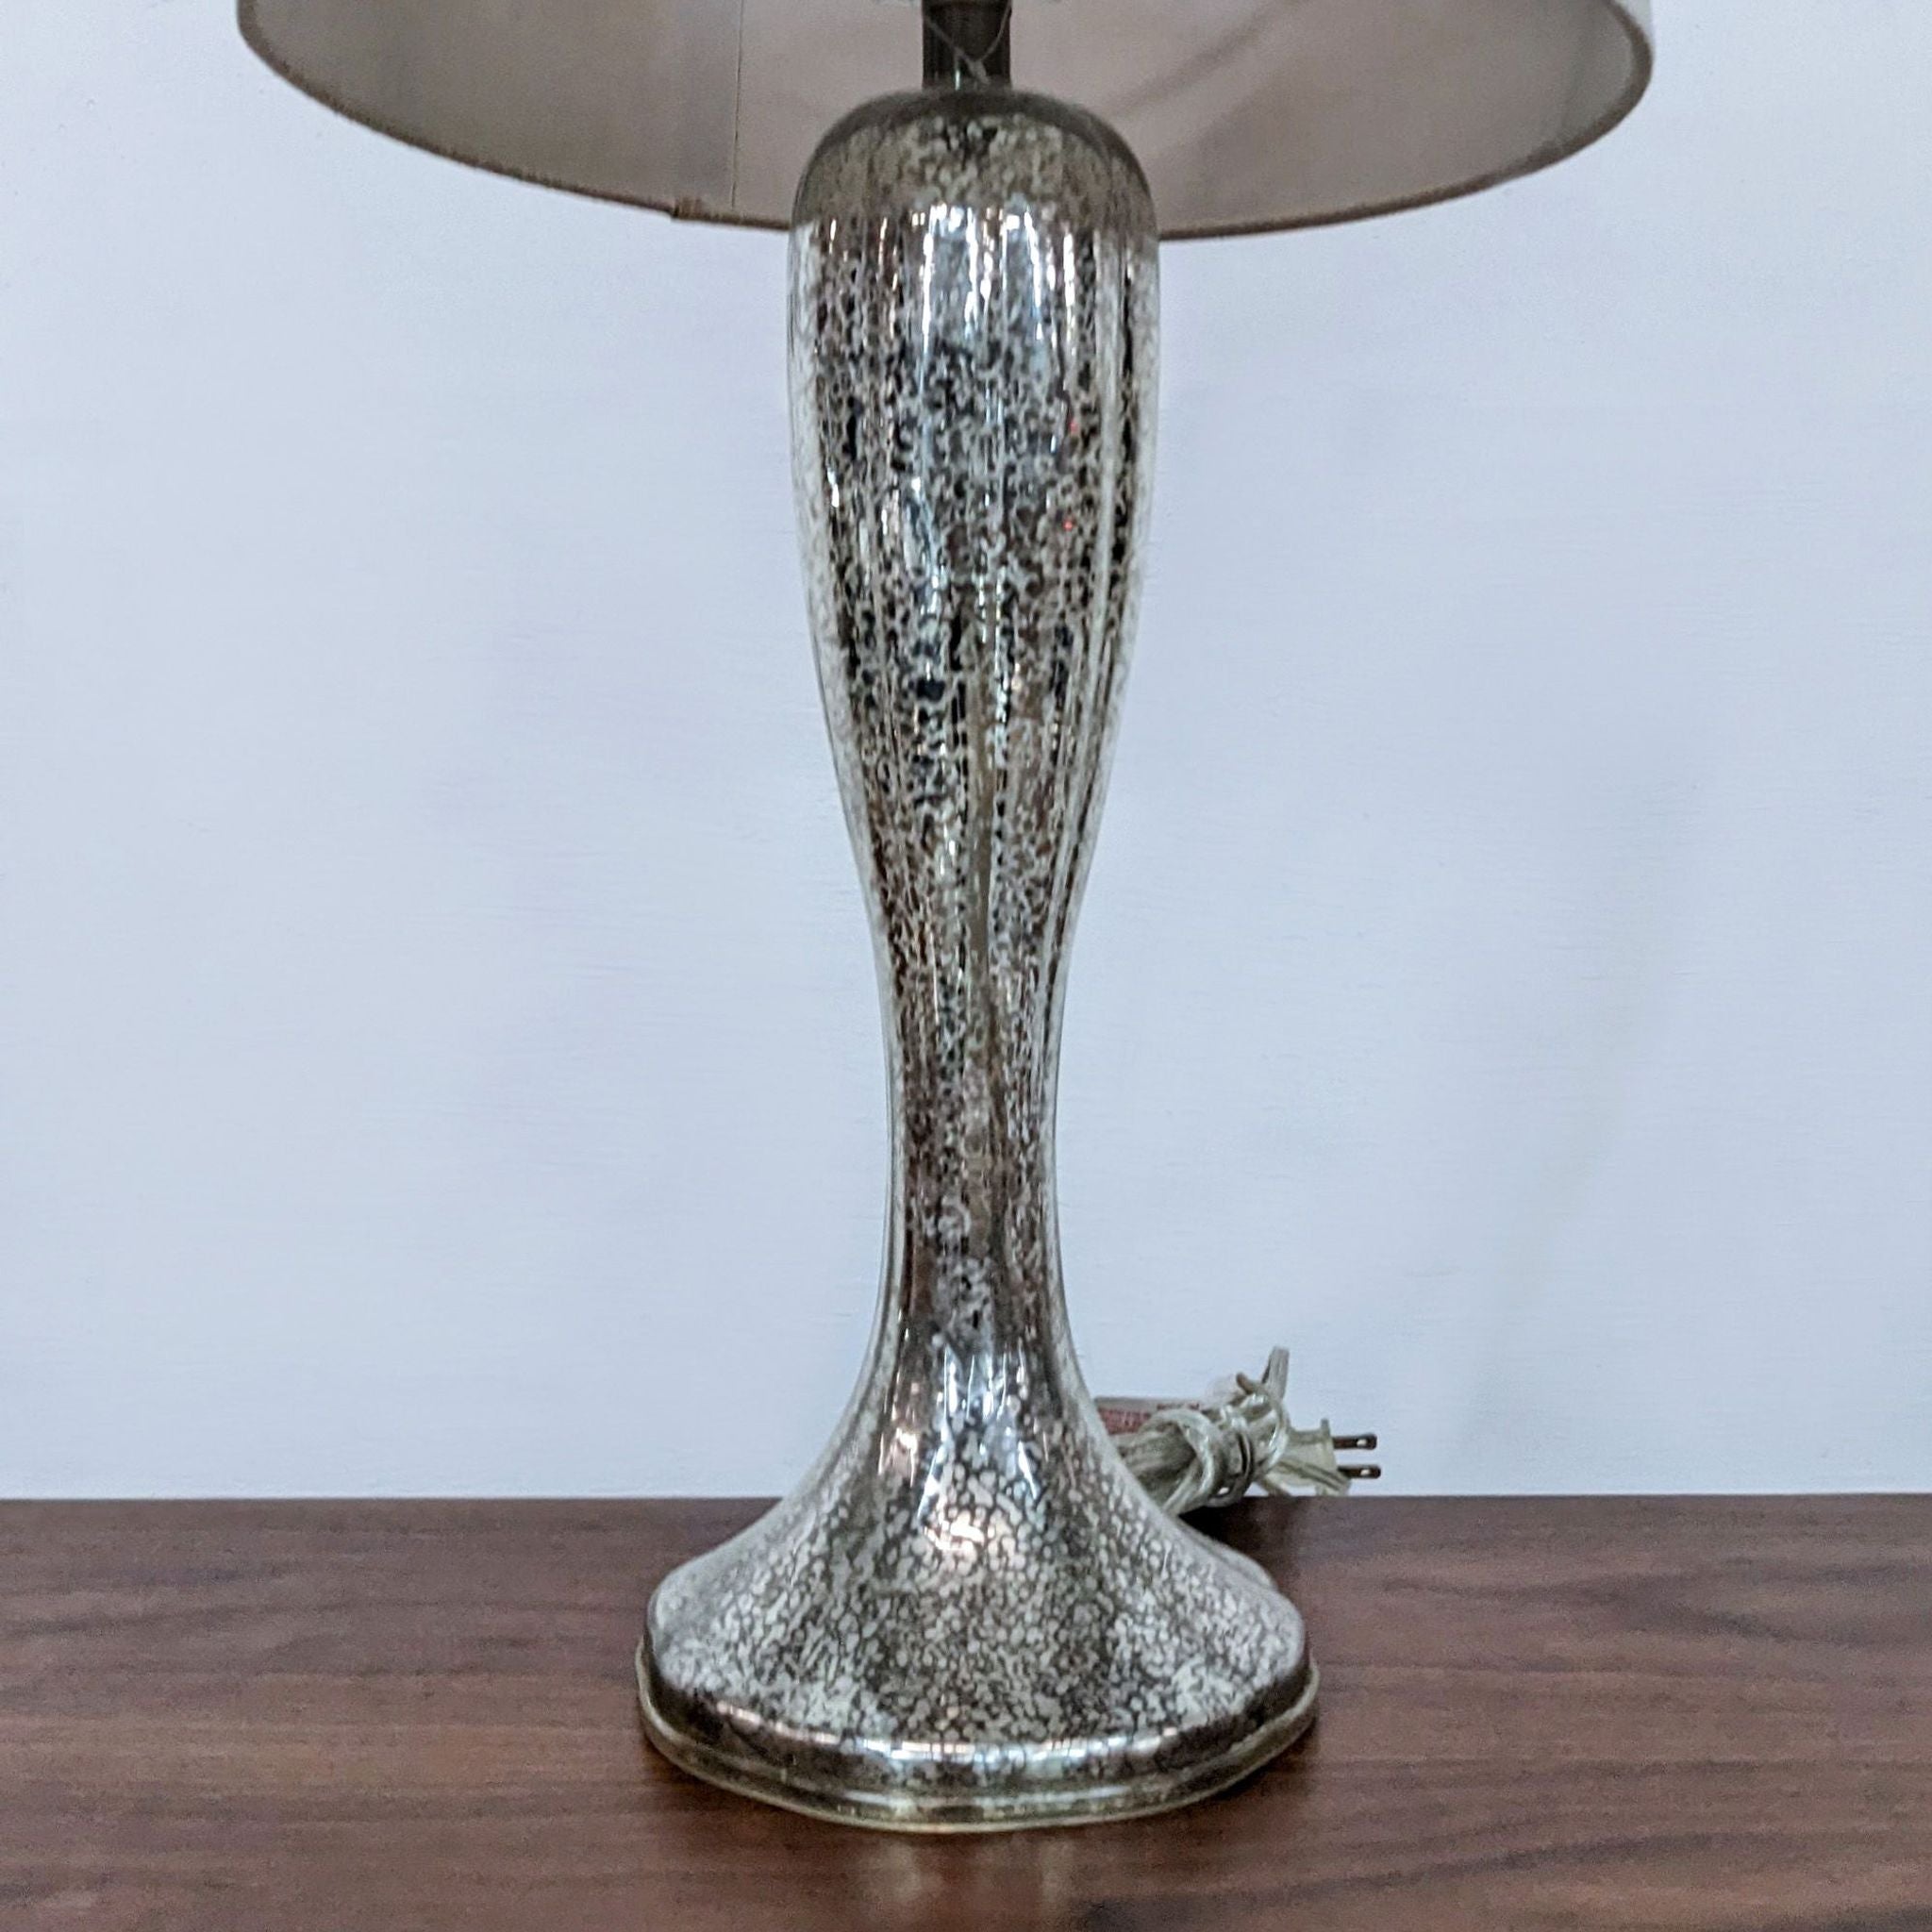 Alt text 2: Close-up of a Reperch table lamp's silver base and installed white spiral light bulb, with the lamp's shade frame visible.